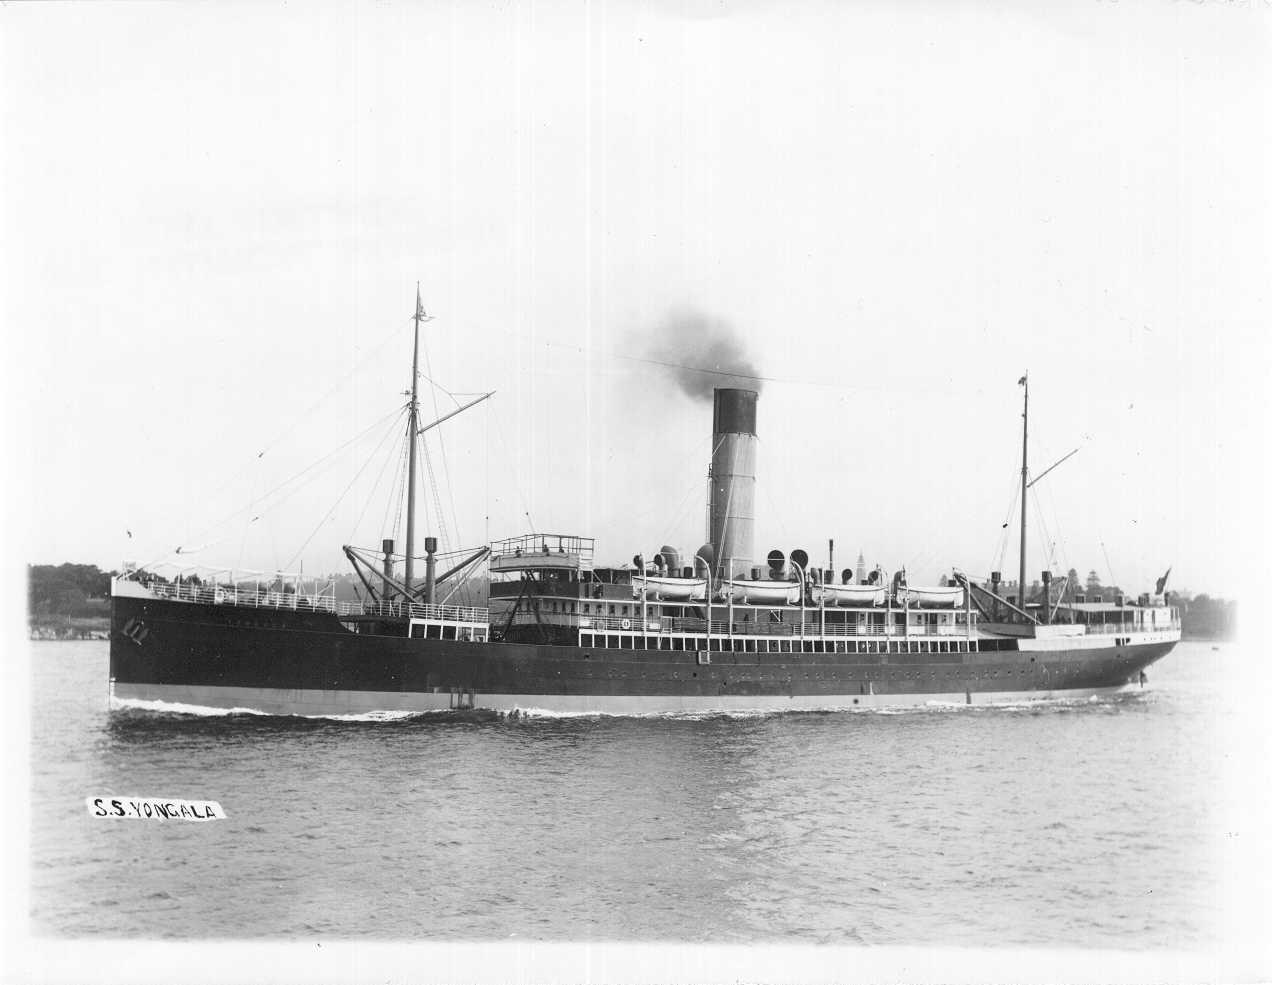 S.S. "Yongala", passenger vessel, built in 1903 in Newcastle, U.K., by Armstrong Whitworth & Co.  Vessel was employed in interstate passenger service from 1903 until 1911.  She was owned by Adelaide Steamship Co, and was lost in a cyclone in Queensland in